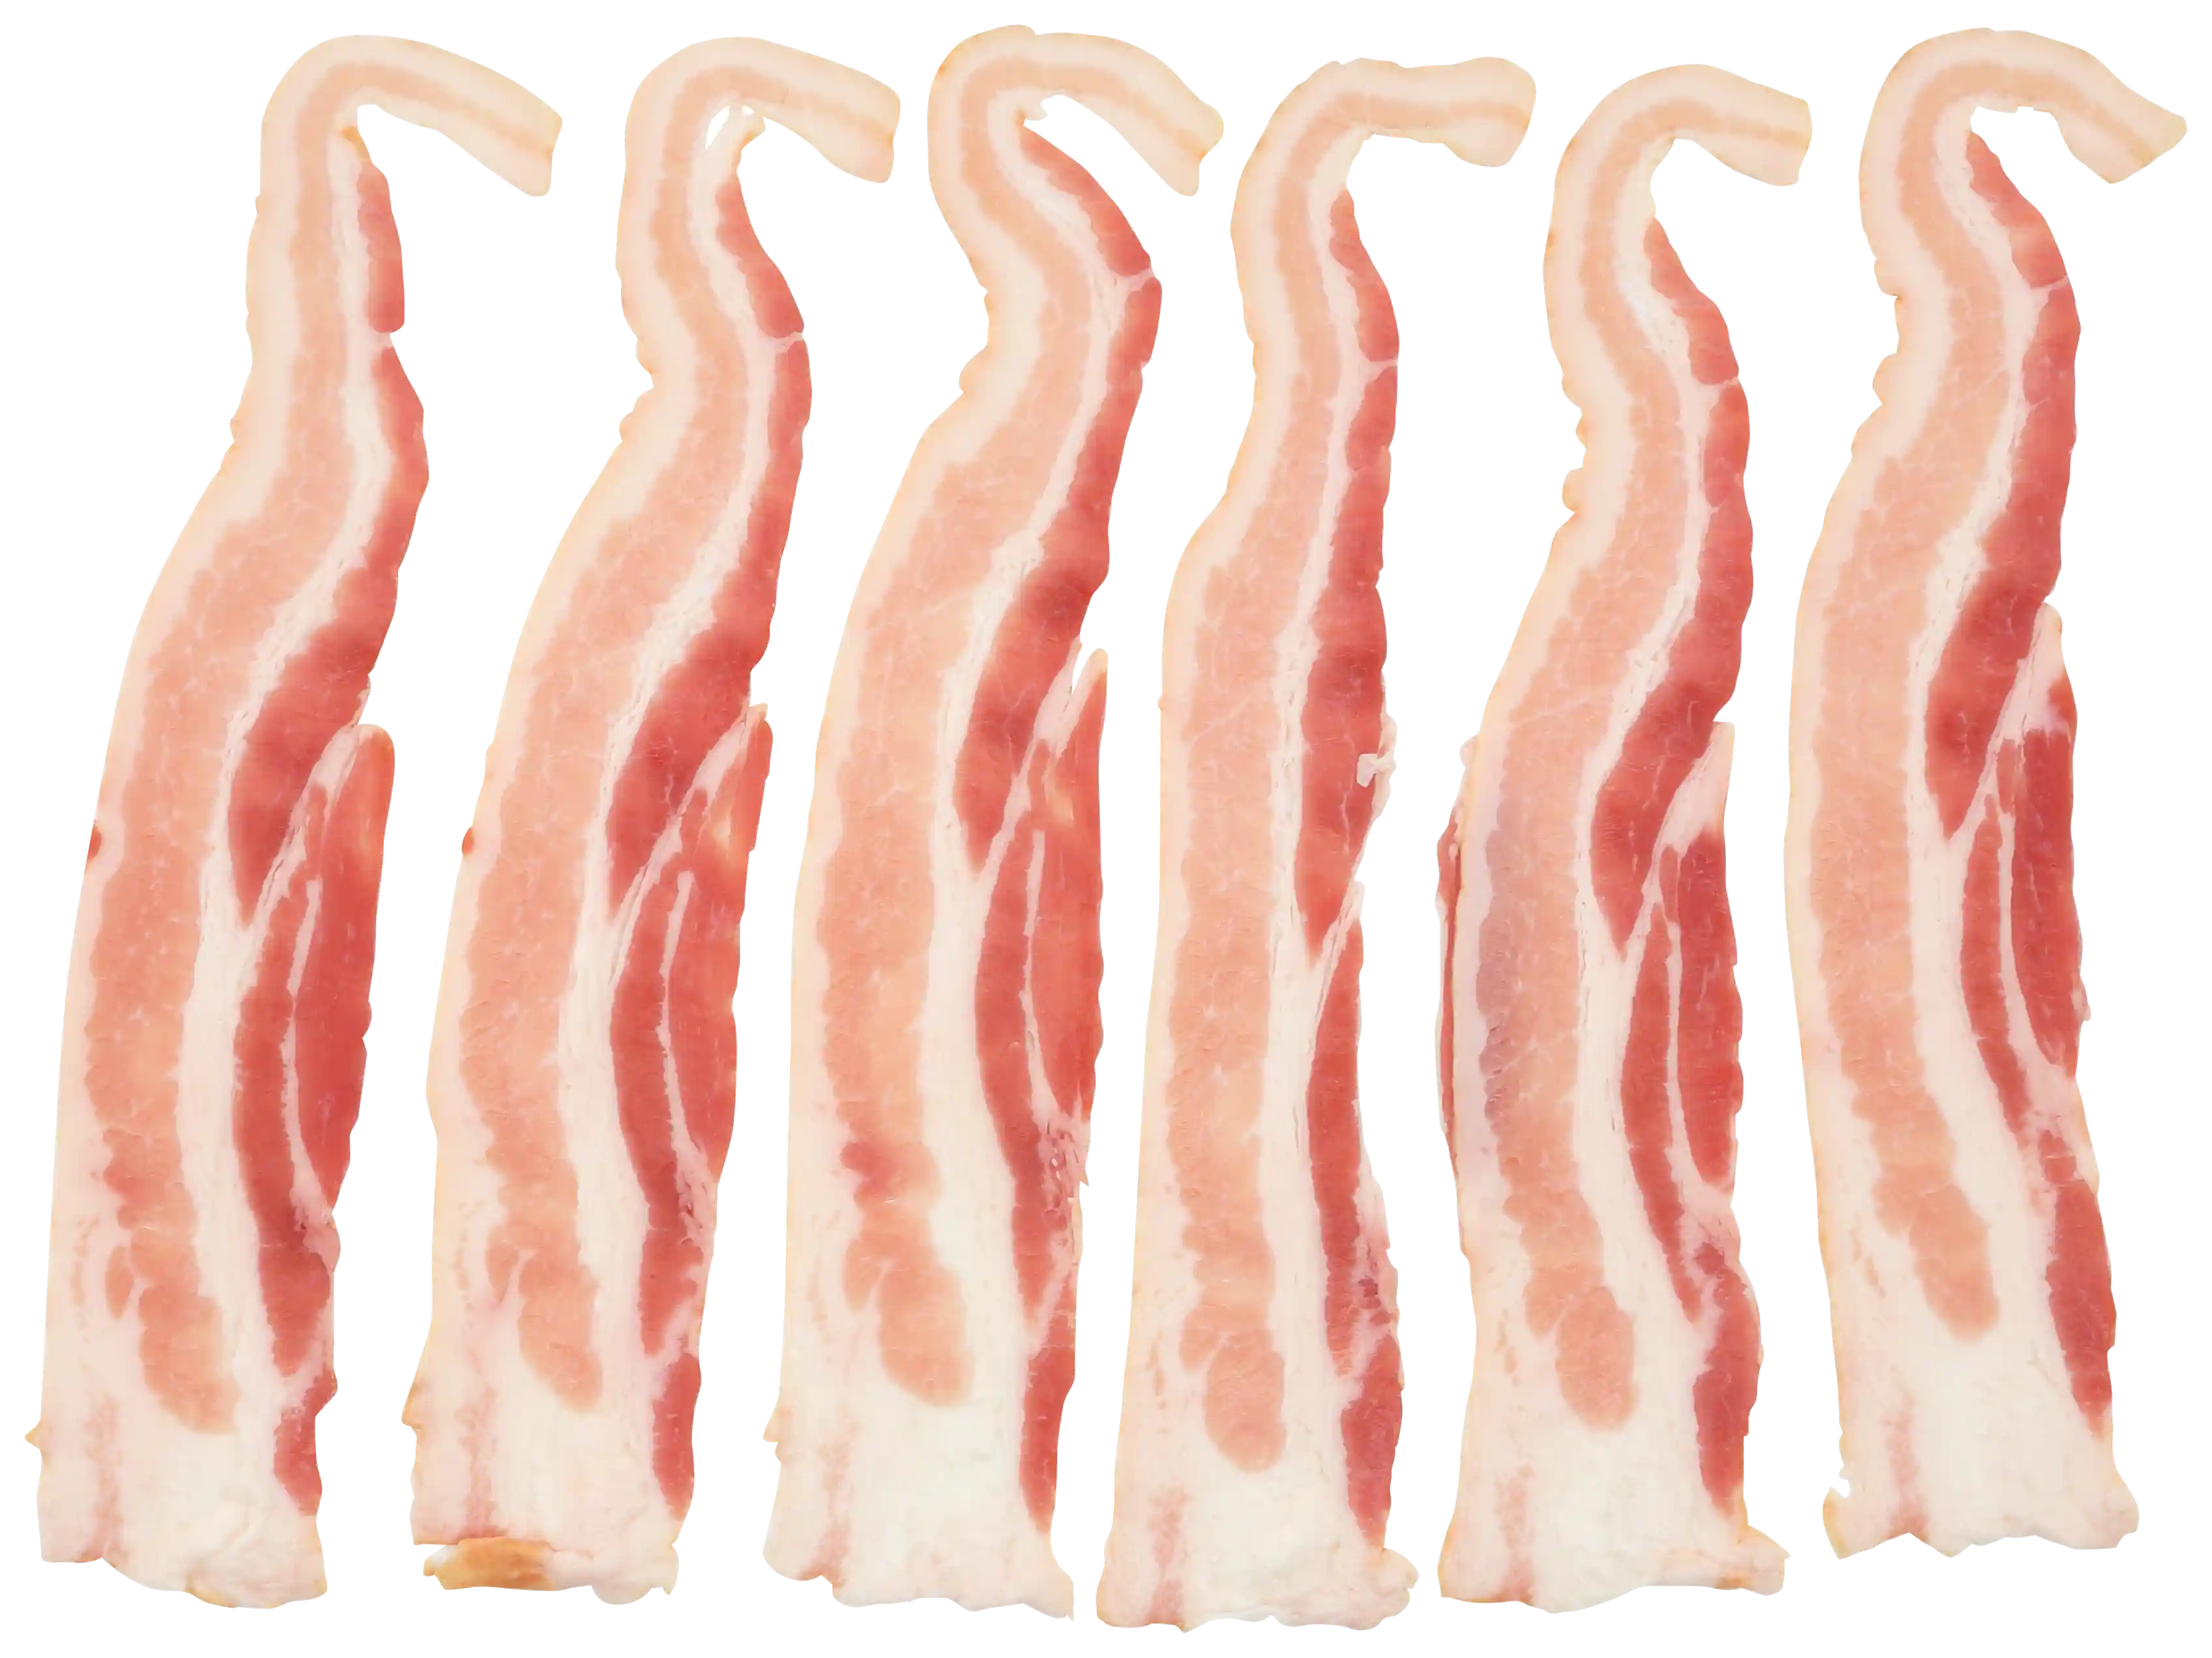 Wright® Brand Naturally Hickory Smoked Thin Sliced Bacon, Flat-Pack®, 15 Lbs, 18-22 Slices per Pound, Gas Flushed_image_11